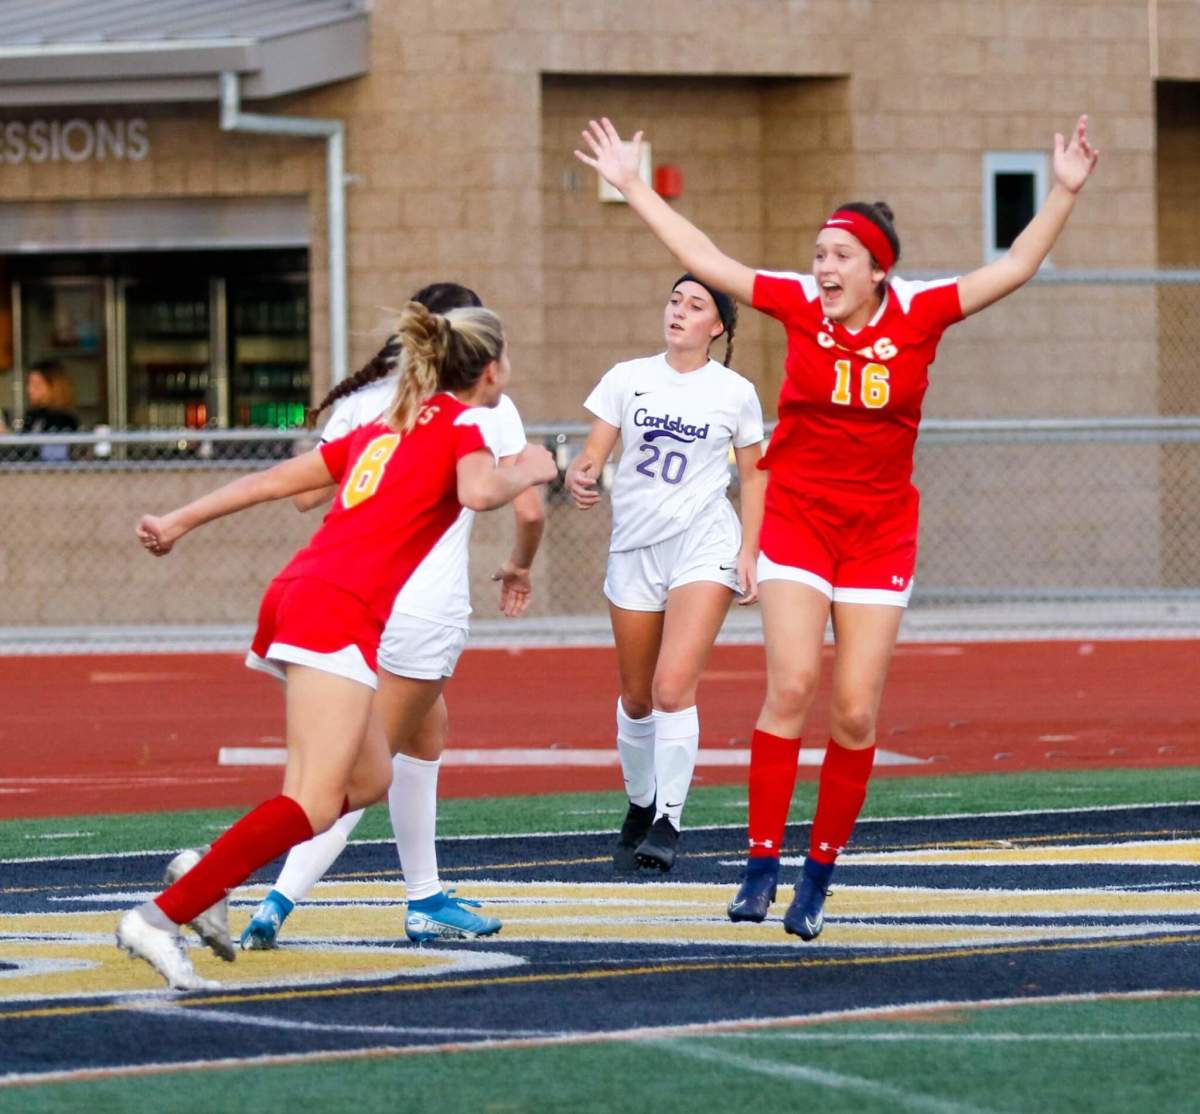 cathedral-catholic-carlsbad-soccer2020-03-01-at-1.27.33-PM-2-scaled